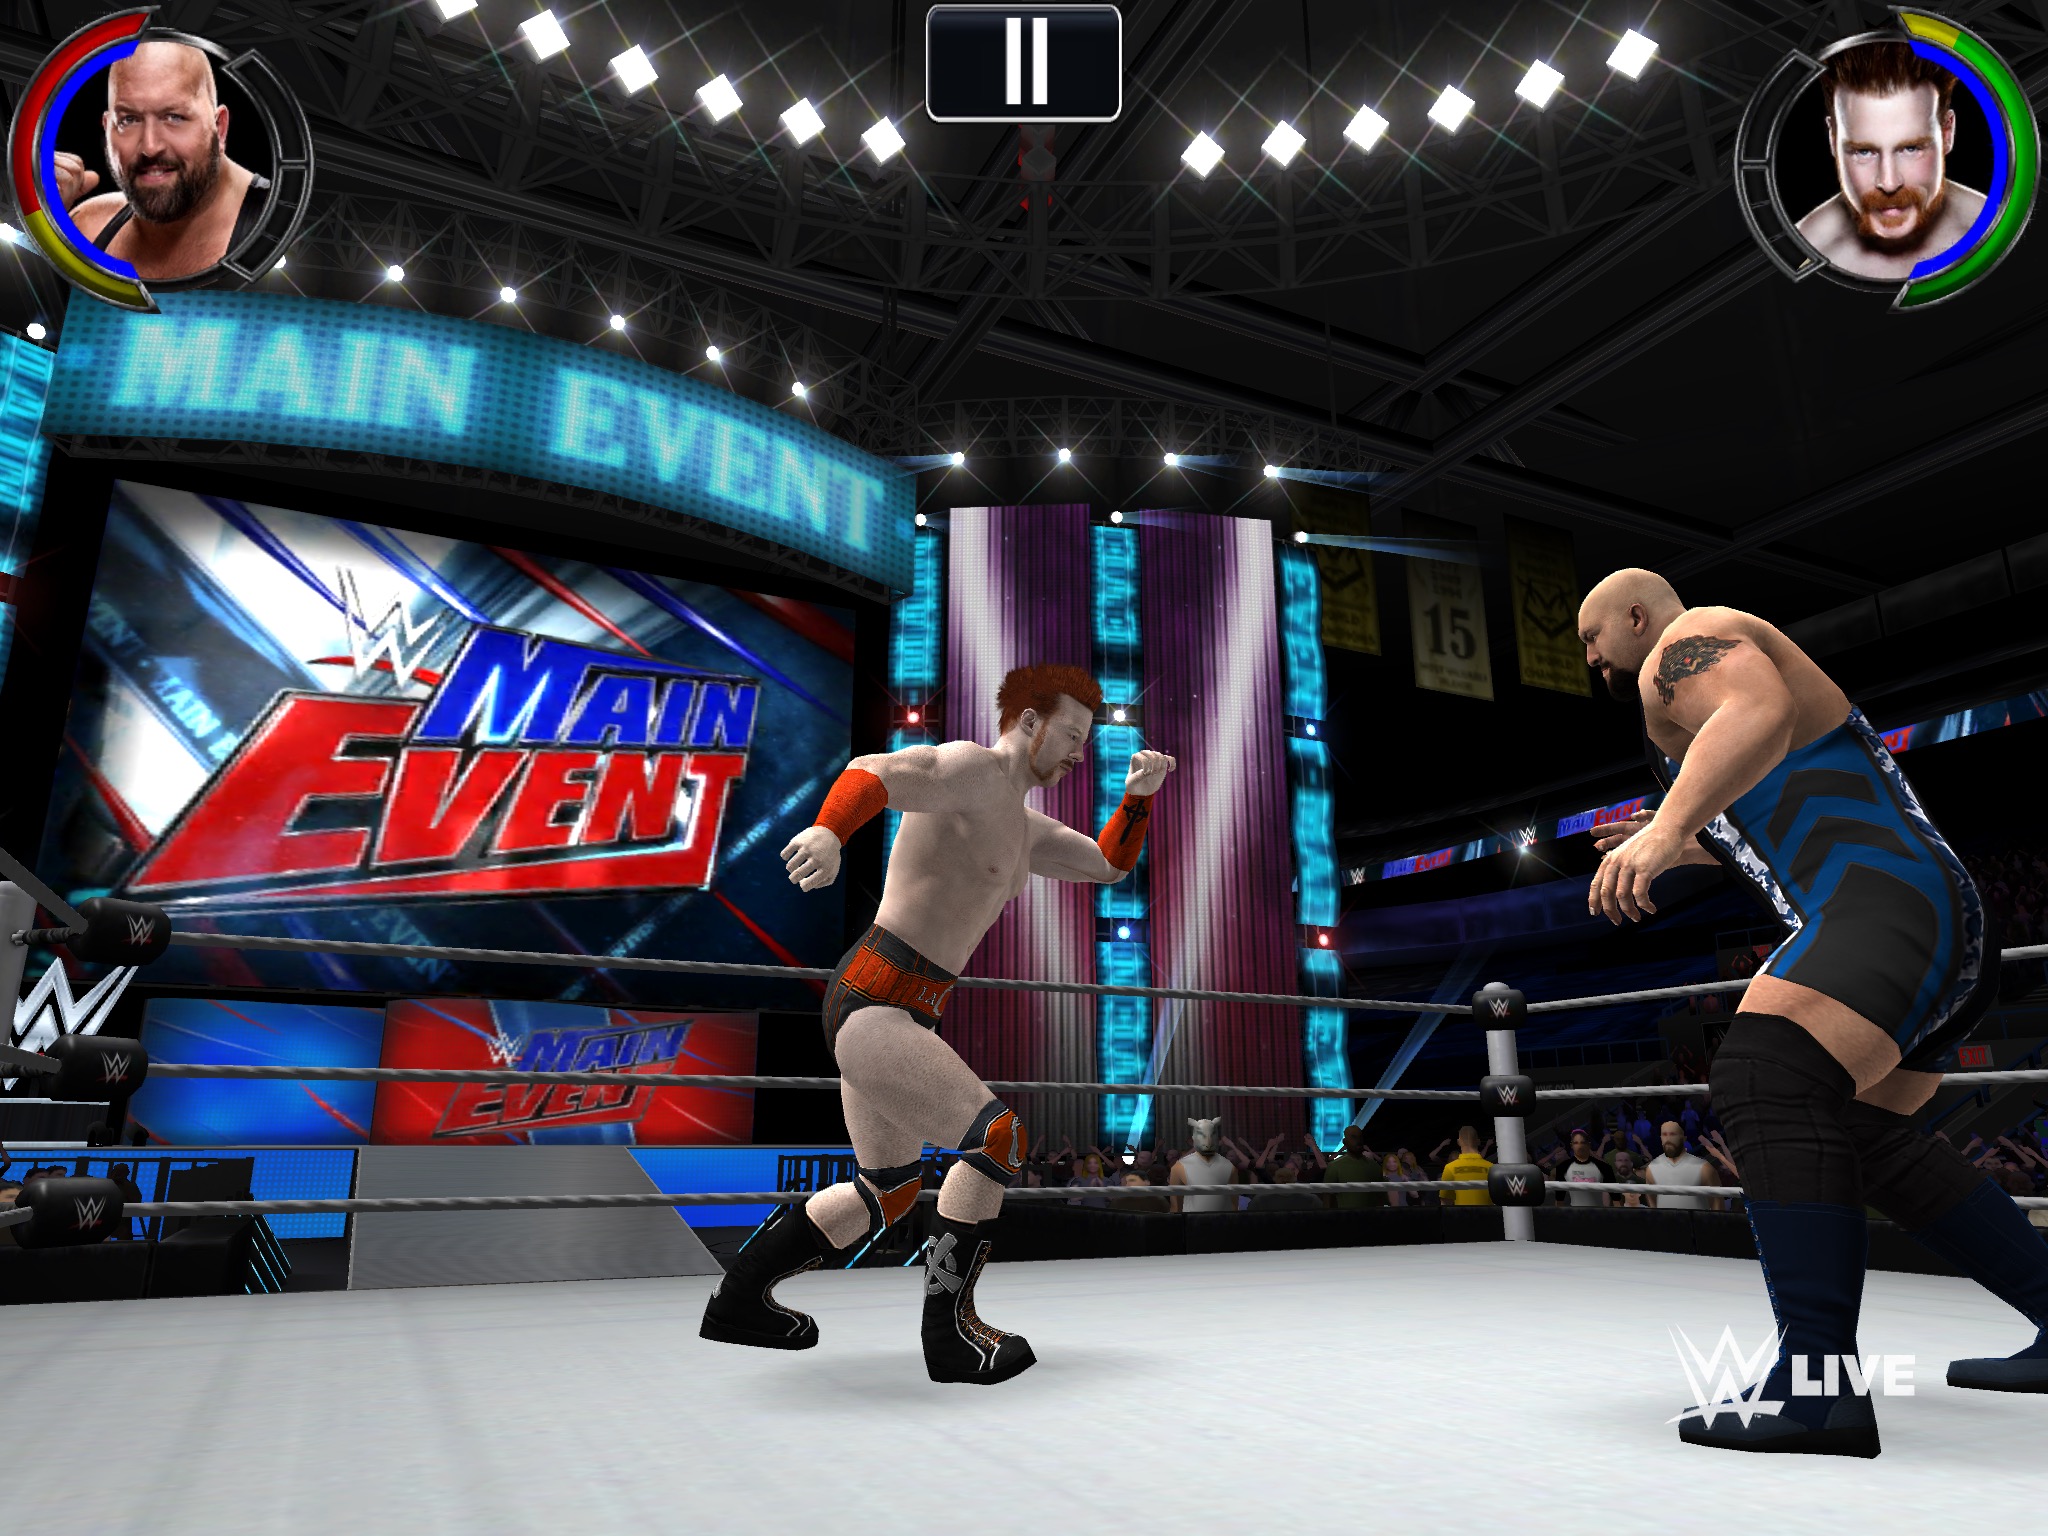 wwe 2k mobile caws